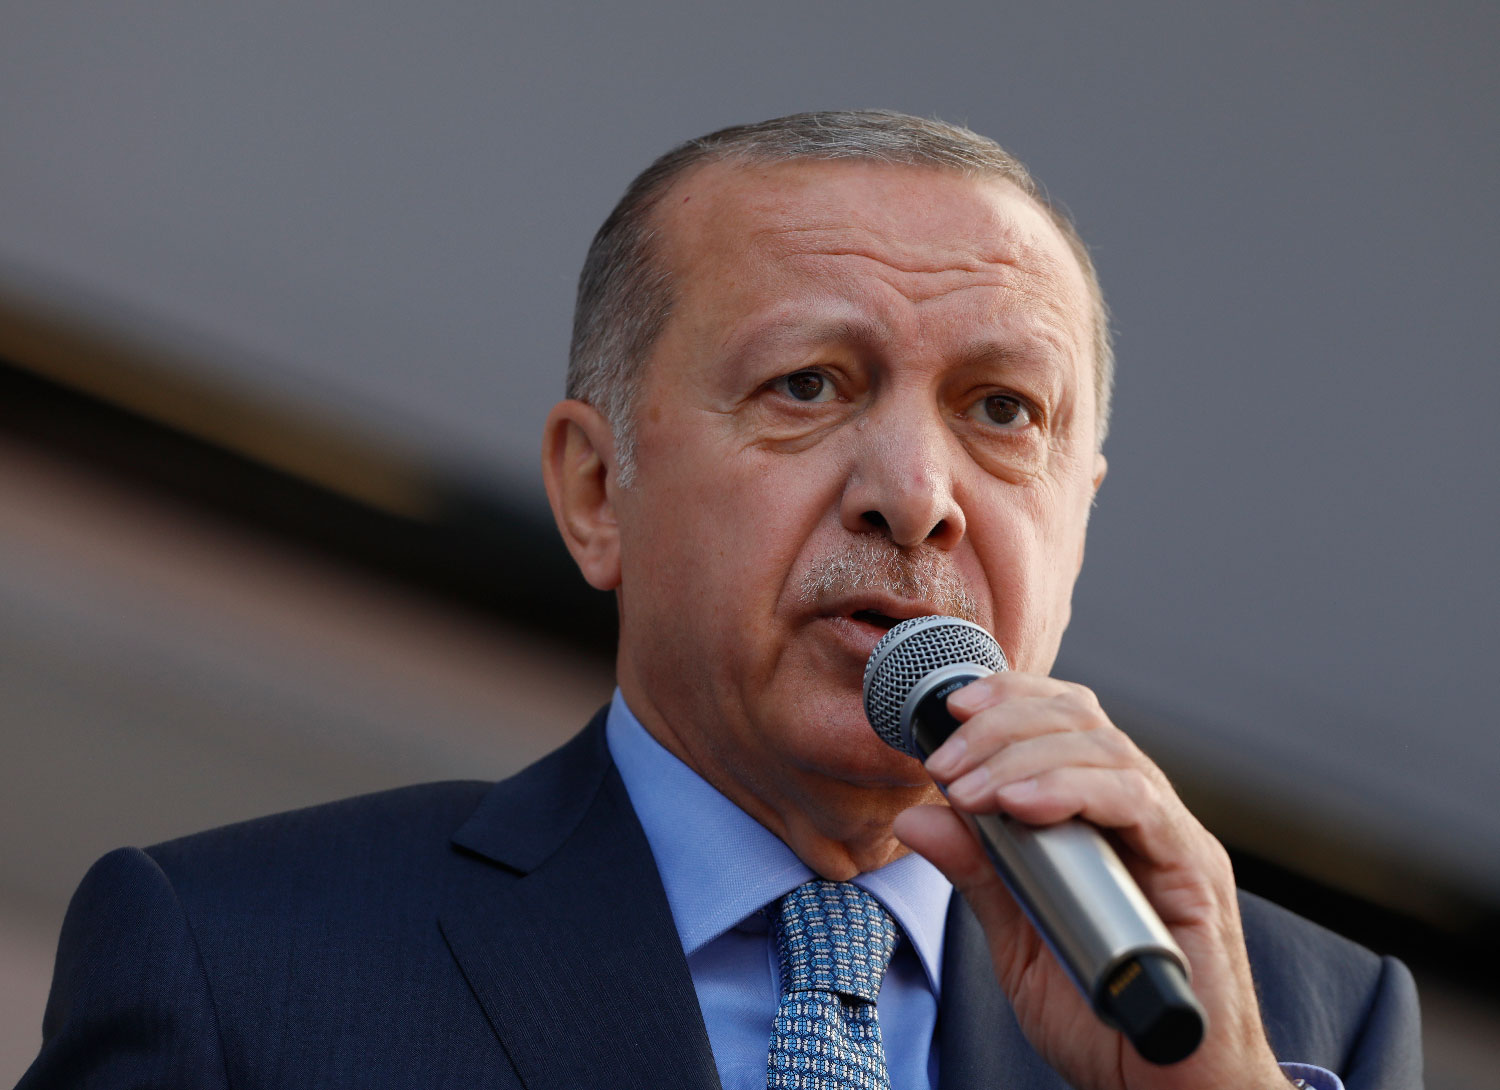 Erdogan said 18,000 migrants amassed on the Turkish borders with Europe within one day